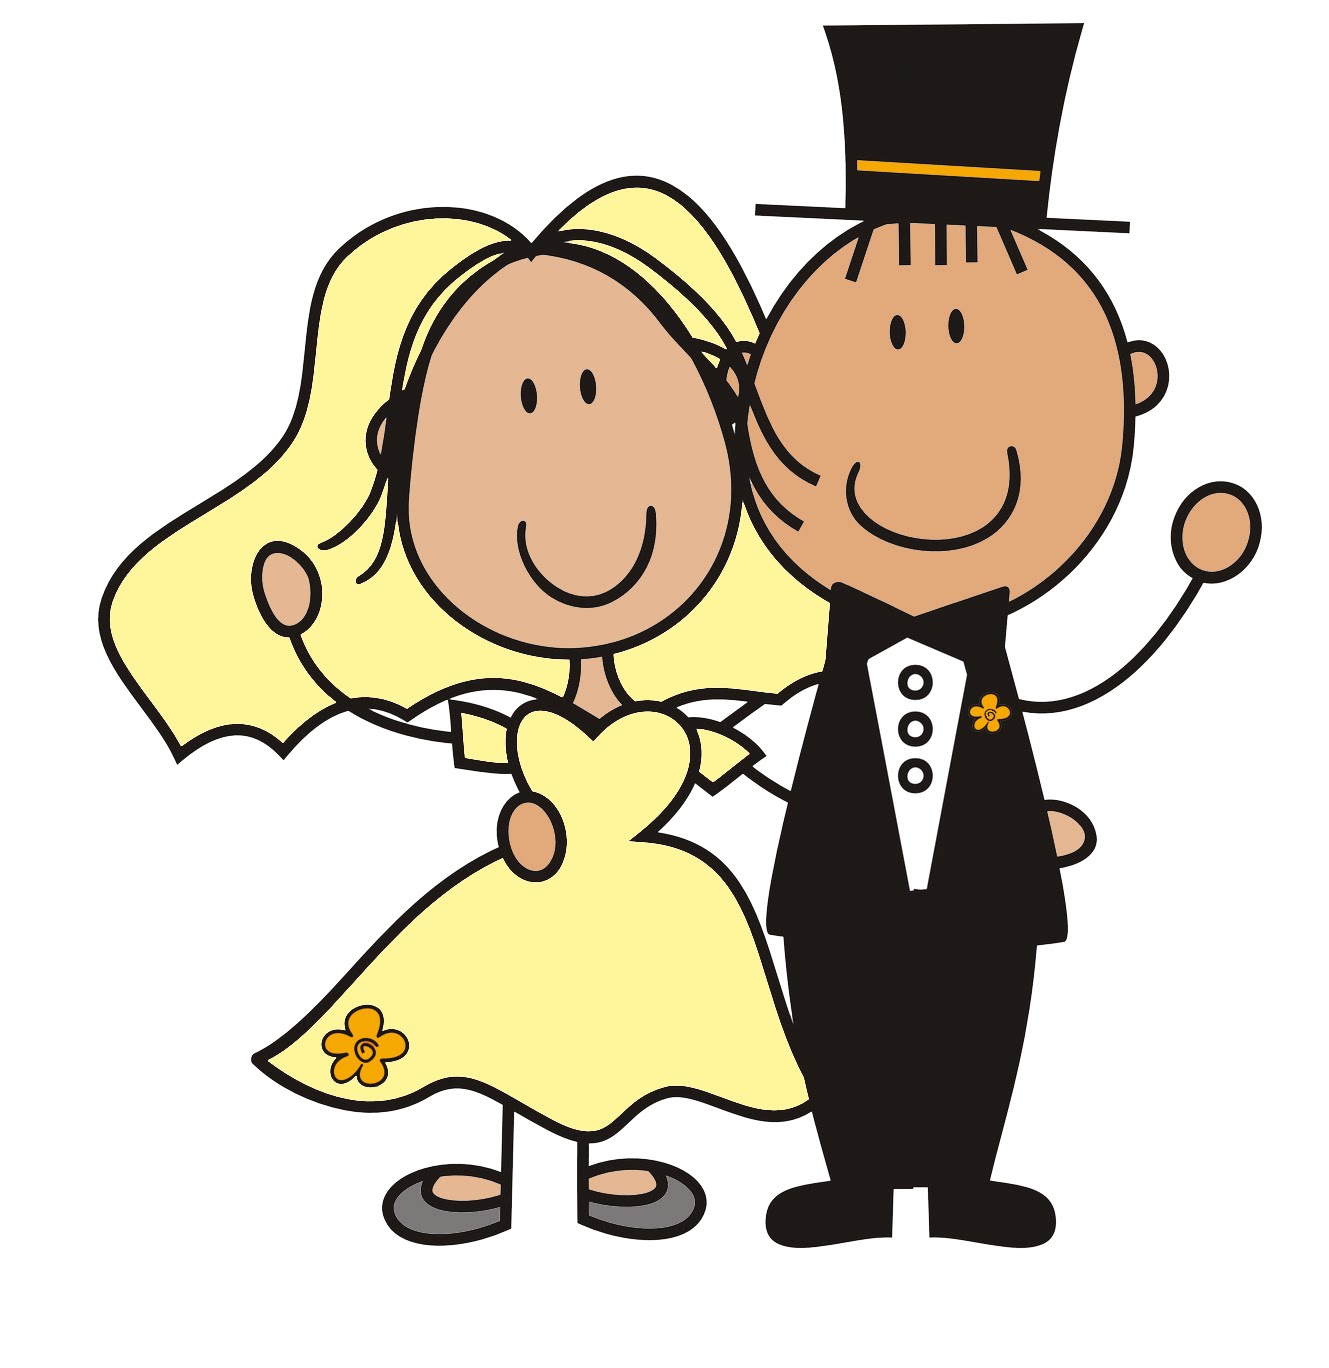 Clip art images for wedding free clipart image